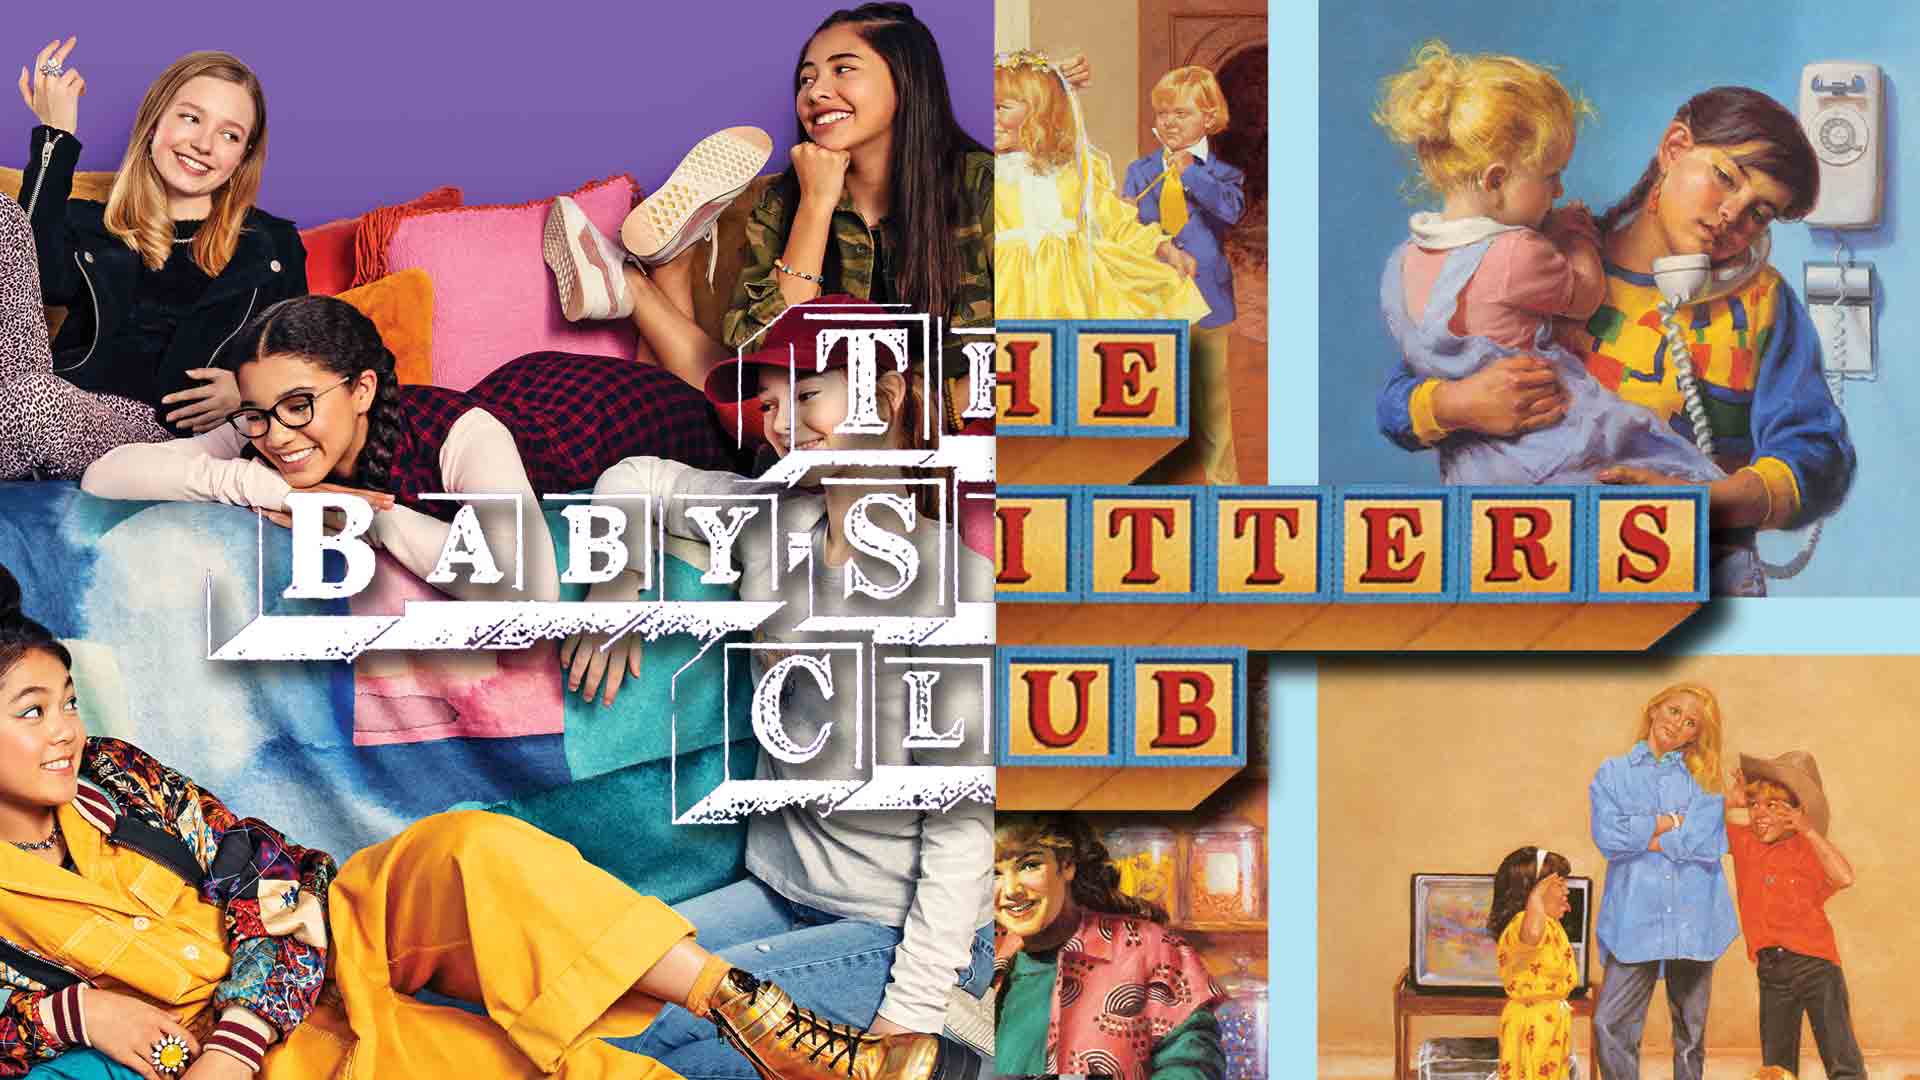 ailsa mackay recommends Baby Sitters Club Sex